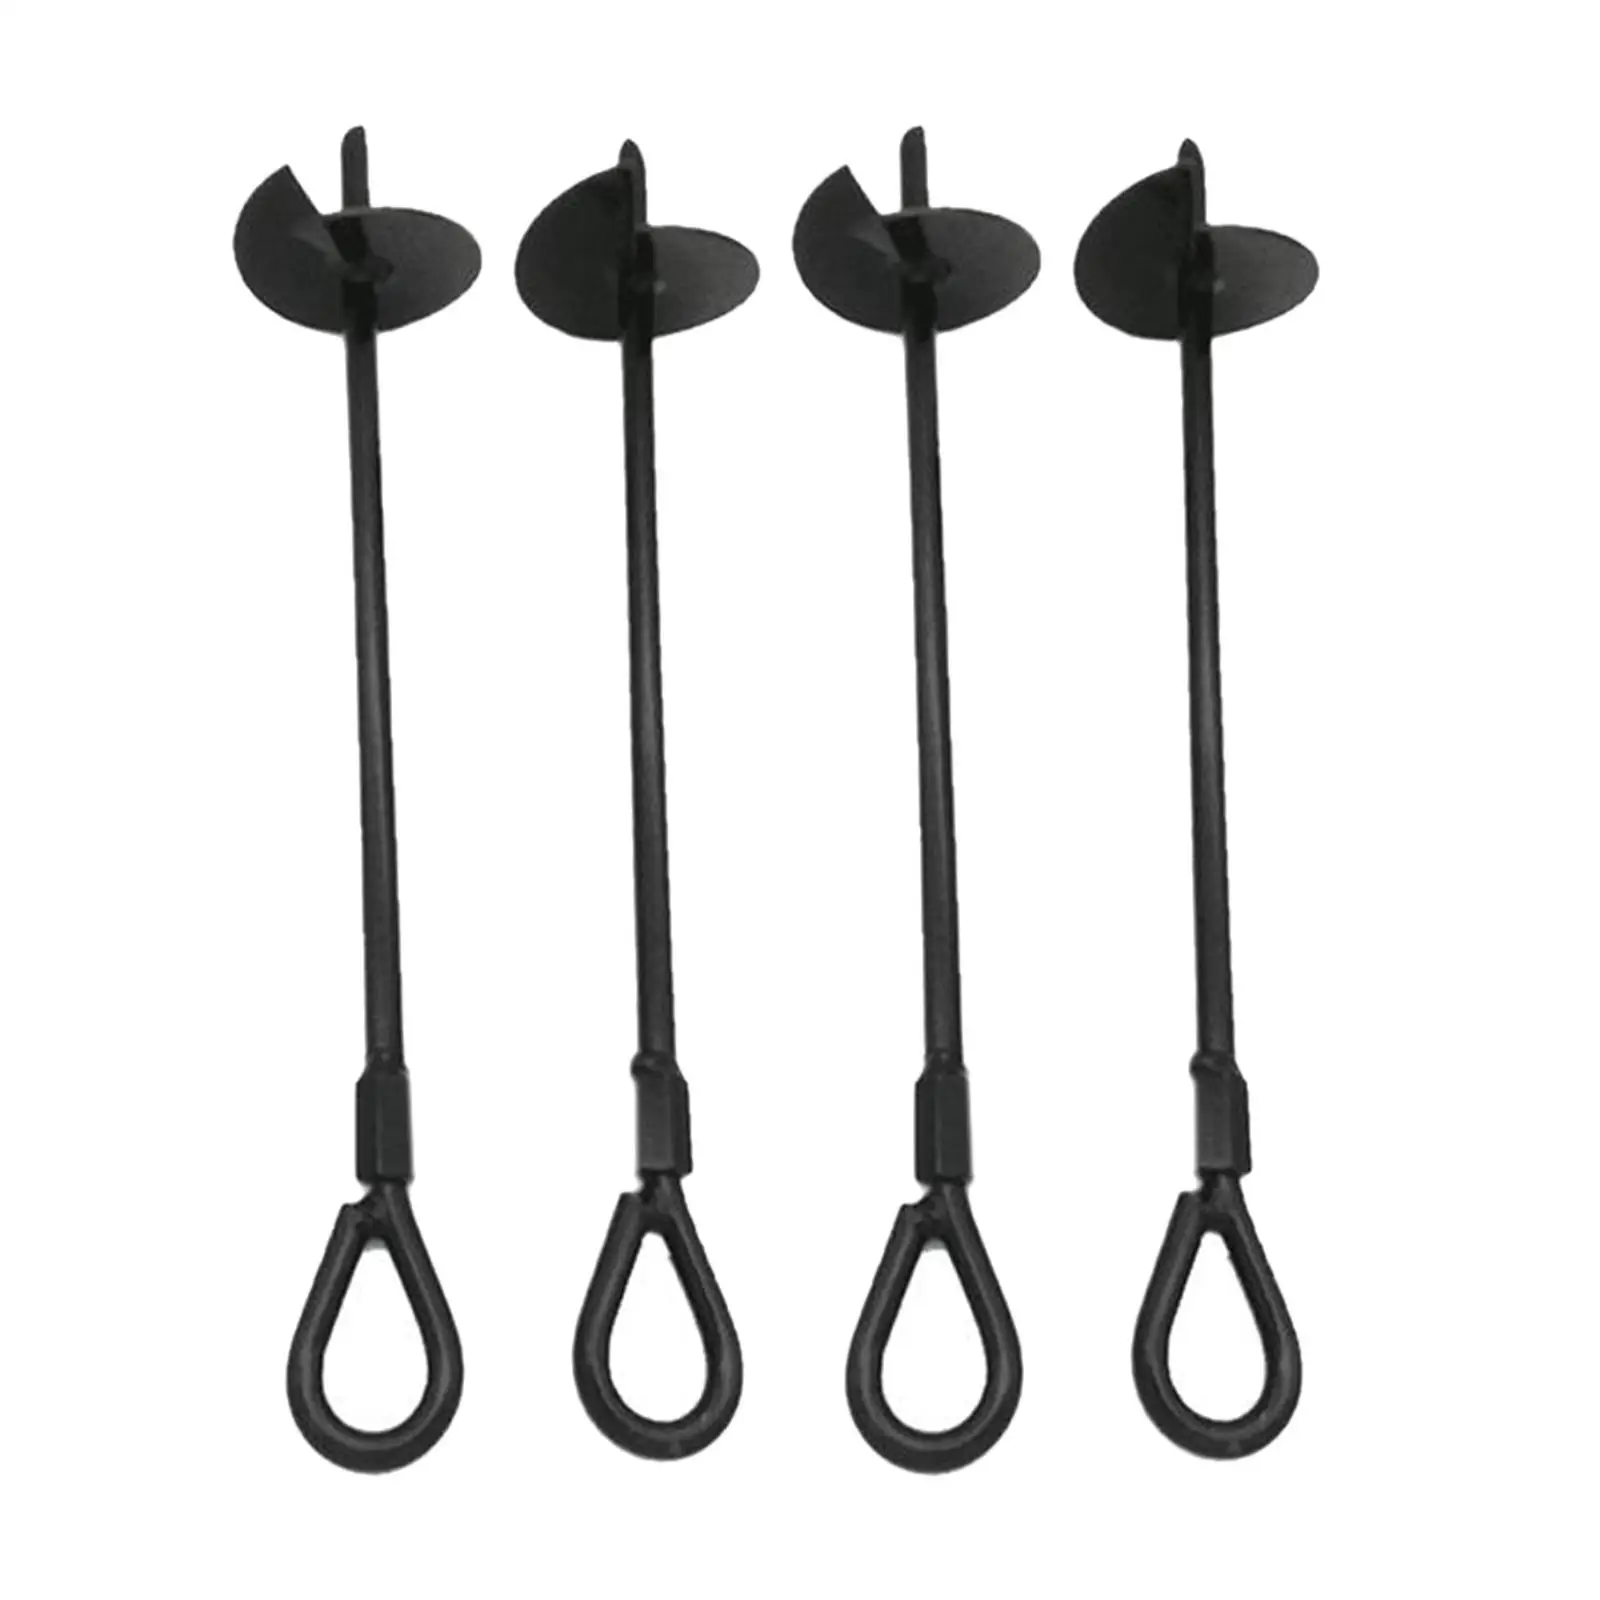  Anchors,   Stake Easy to Use Reusable  Drill Bit Anchor Hook for Hiking Car Ports Canopies Swing Picnic